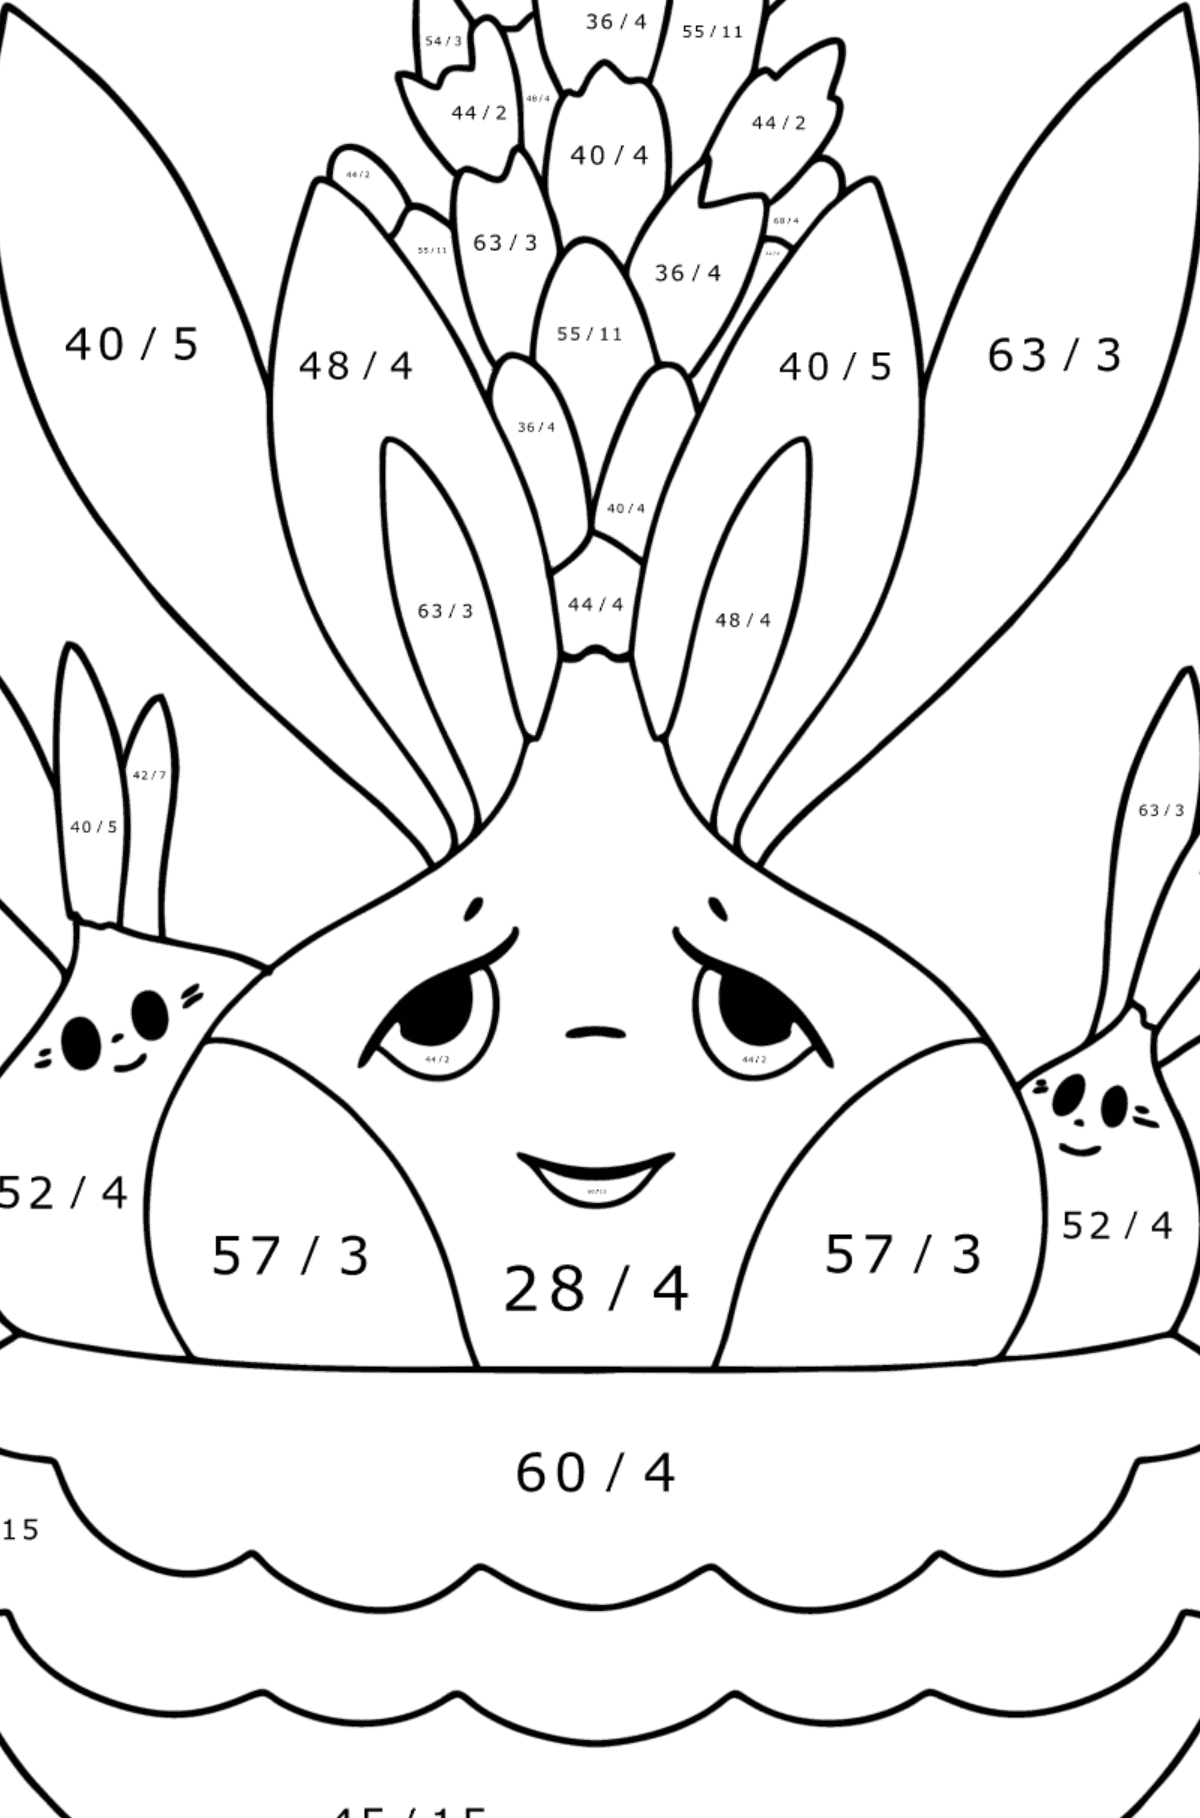 Hyacinth flowers with eyes coloring page - Math Coloring - Division for Kids